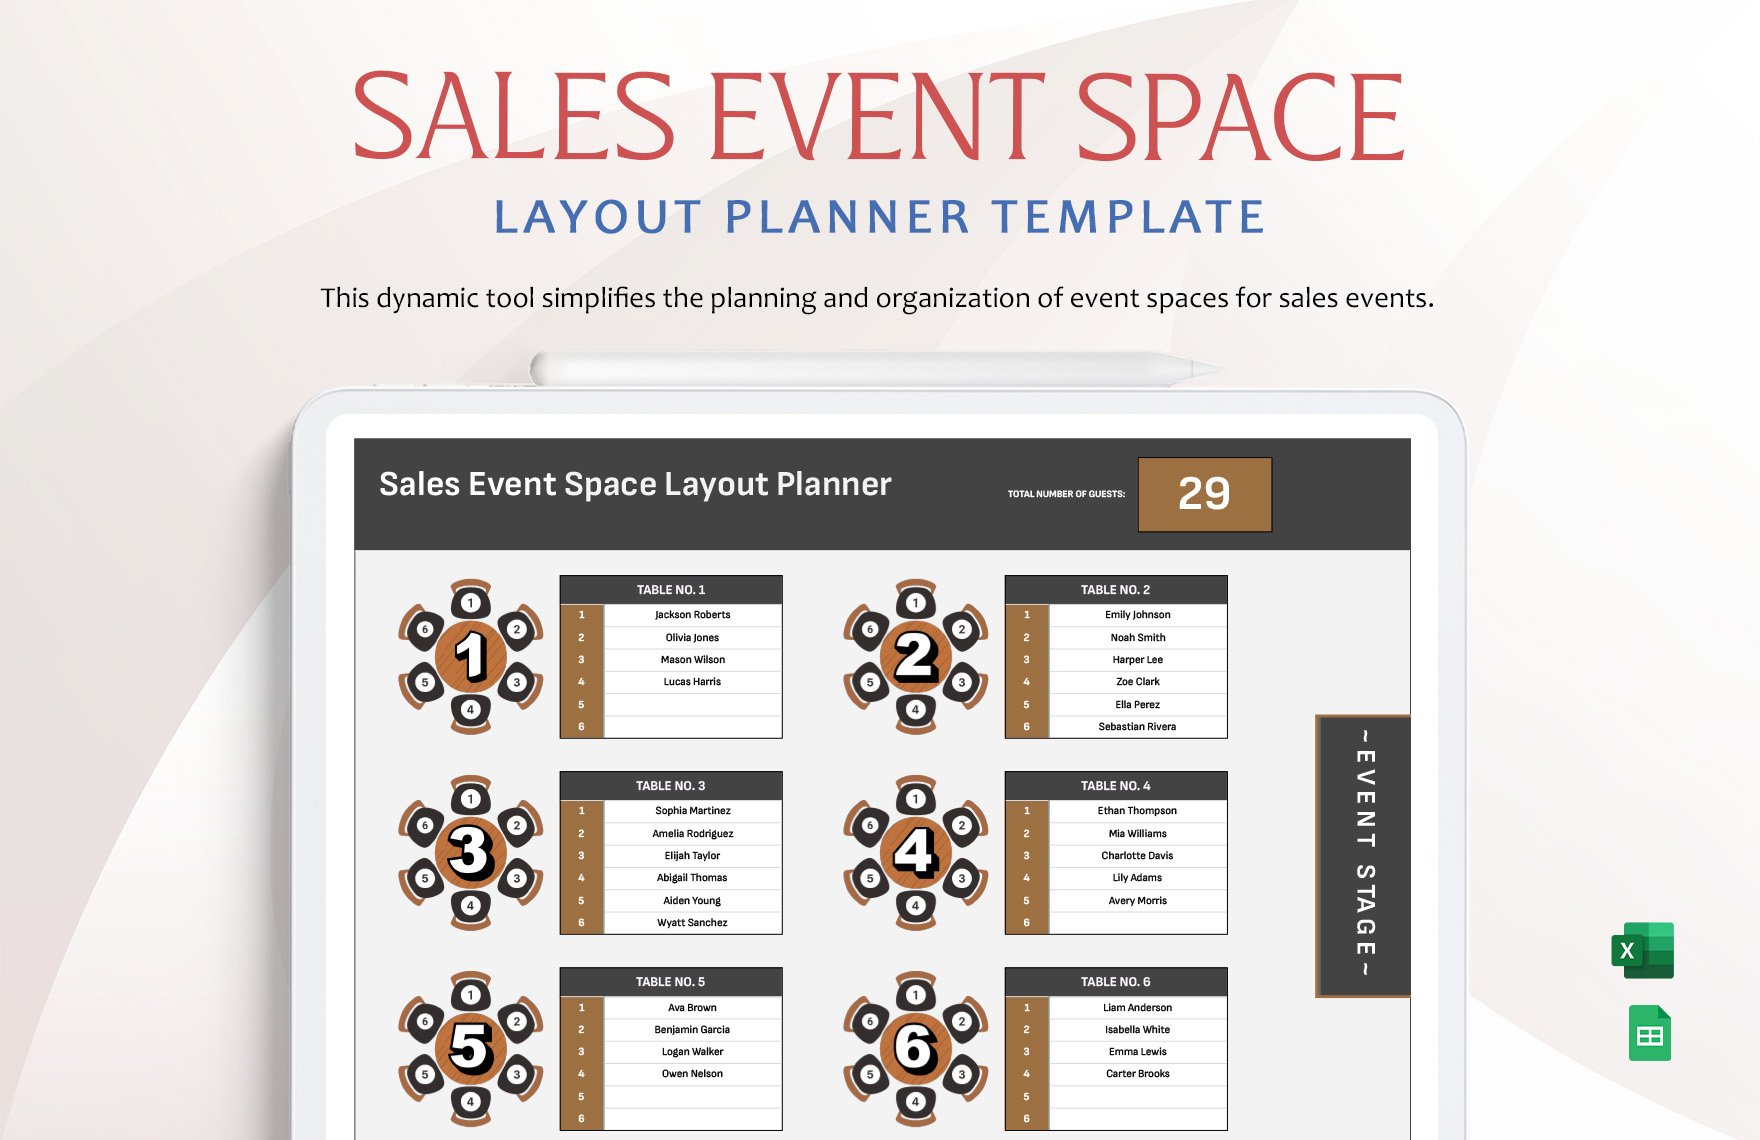 Sales Event Space Layout Planner Template in Excel, Google Sheets